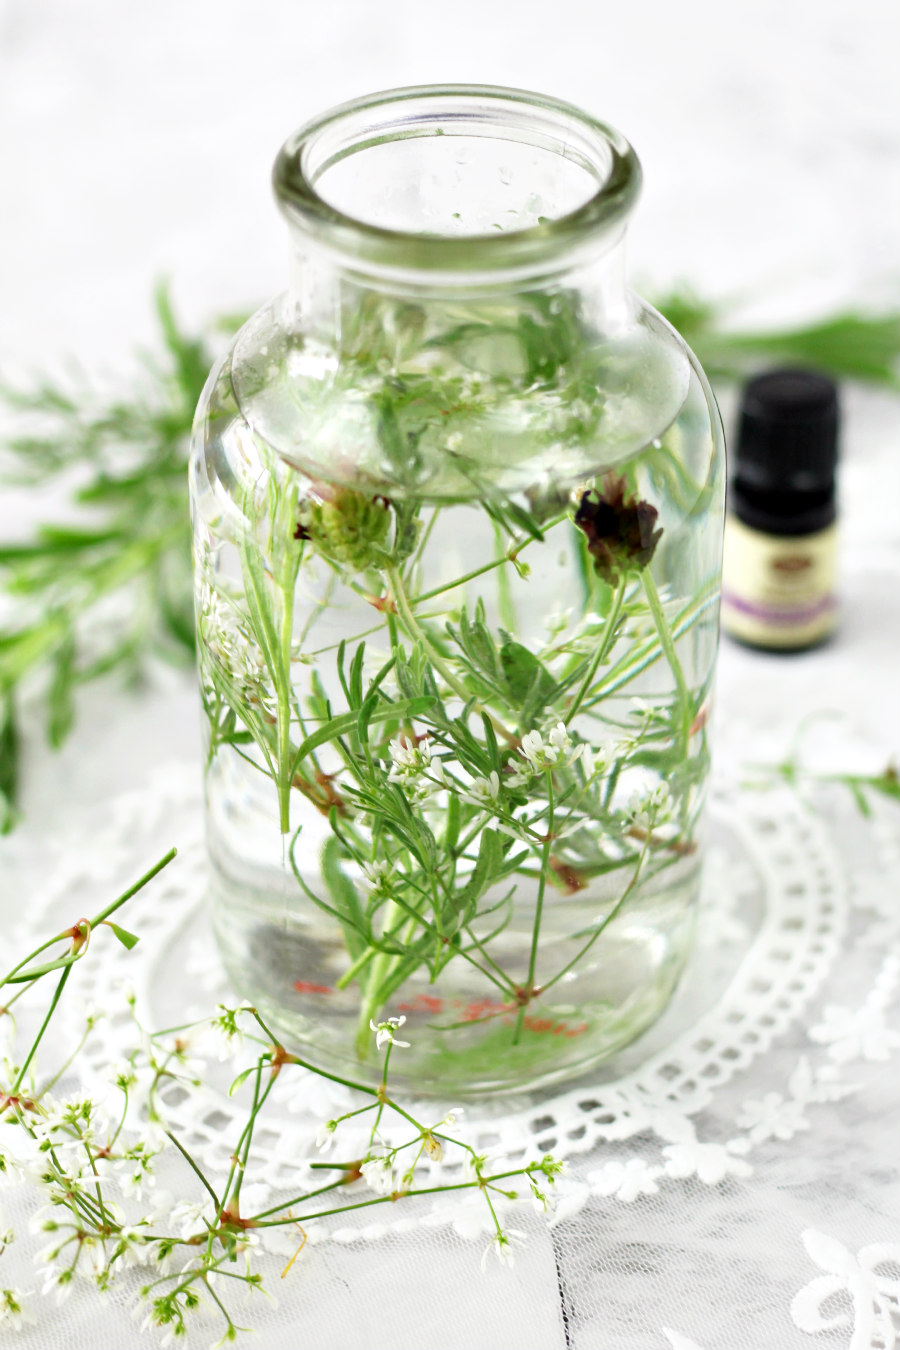 Botanical Herb Fragrance Diffuser in center of photo with fresh lavender sprigs and tiny white flower stems around it. A bottle of lavender essential oil sits in the background.